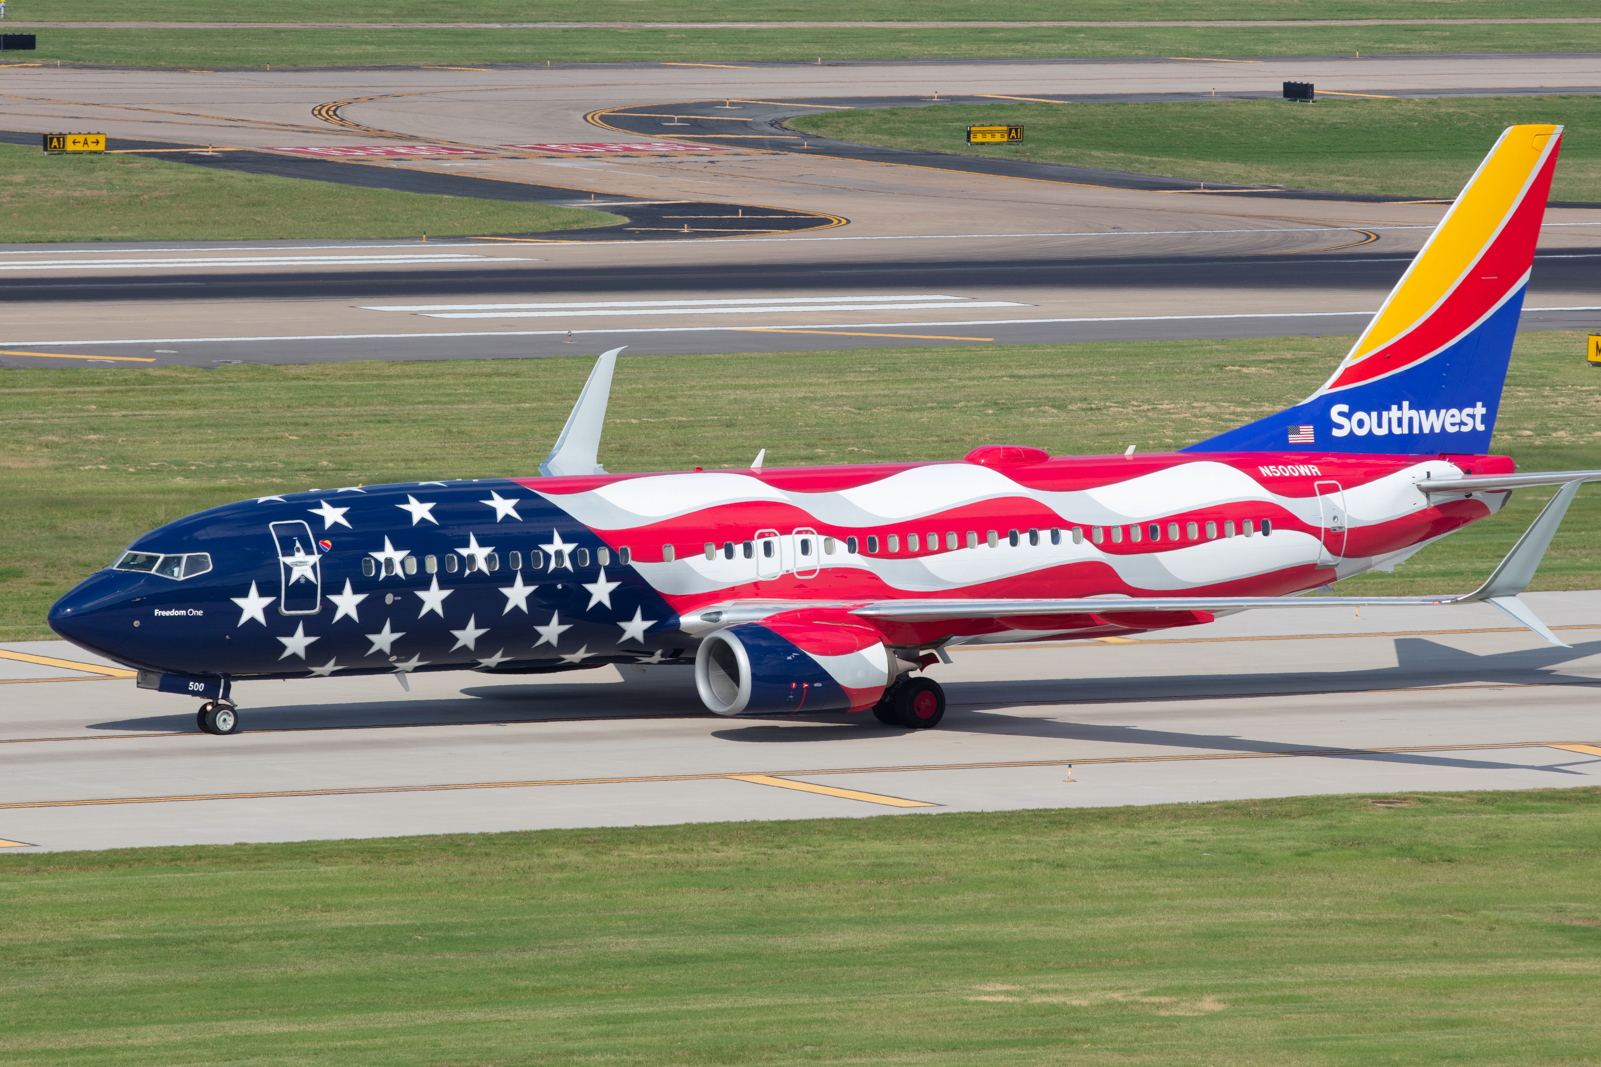 Southwest Airlines Boeing 737 reg: N500WR featuring Freedom One livery, a stylized flag of the United States of America. Picture: Southwest Airlines. Click to enlarge.